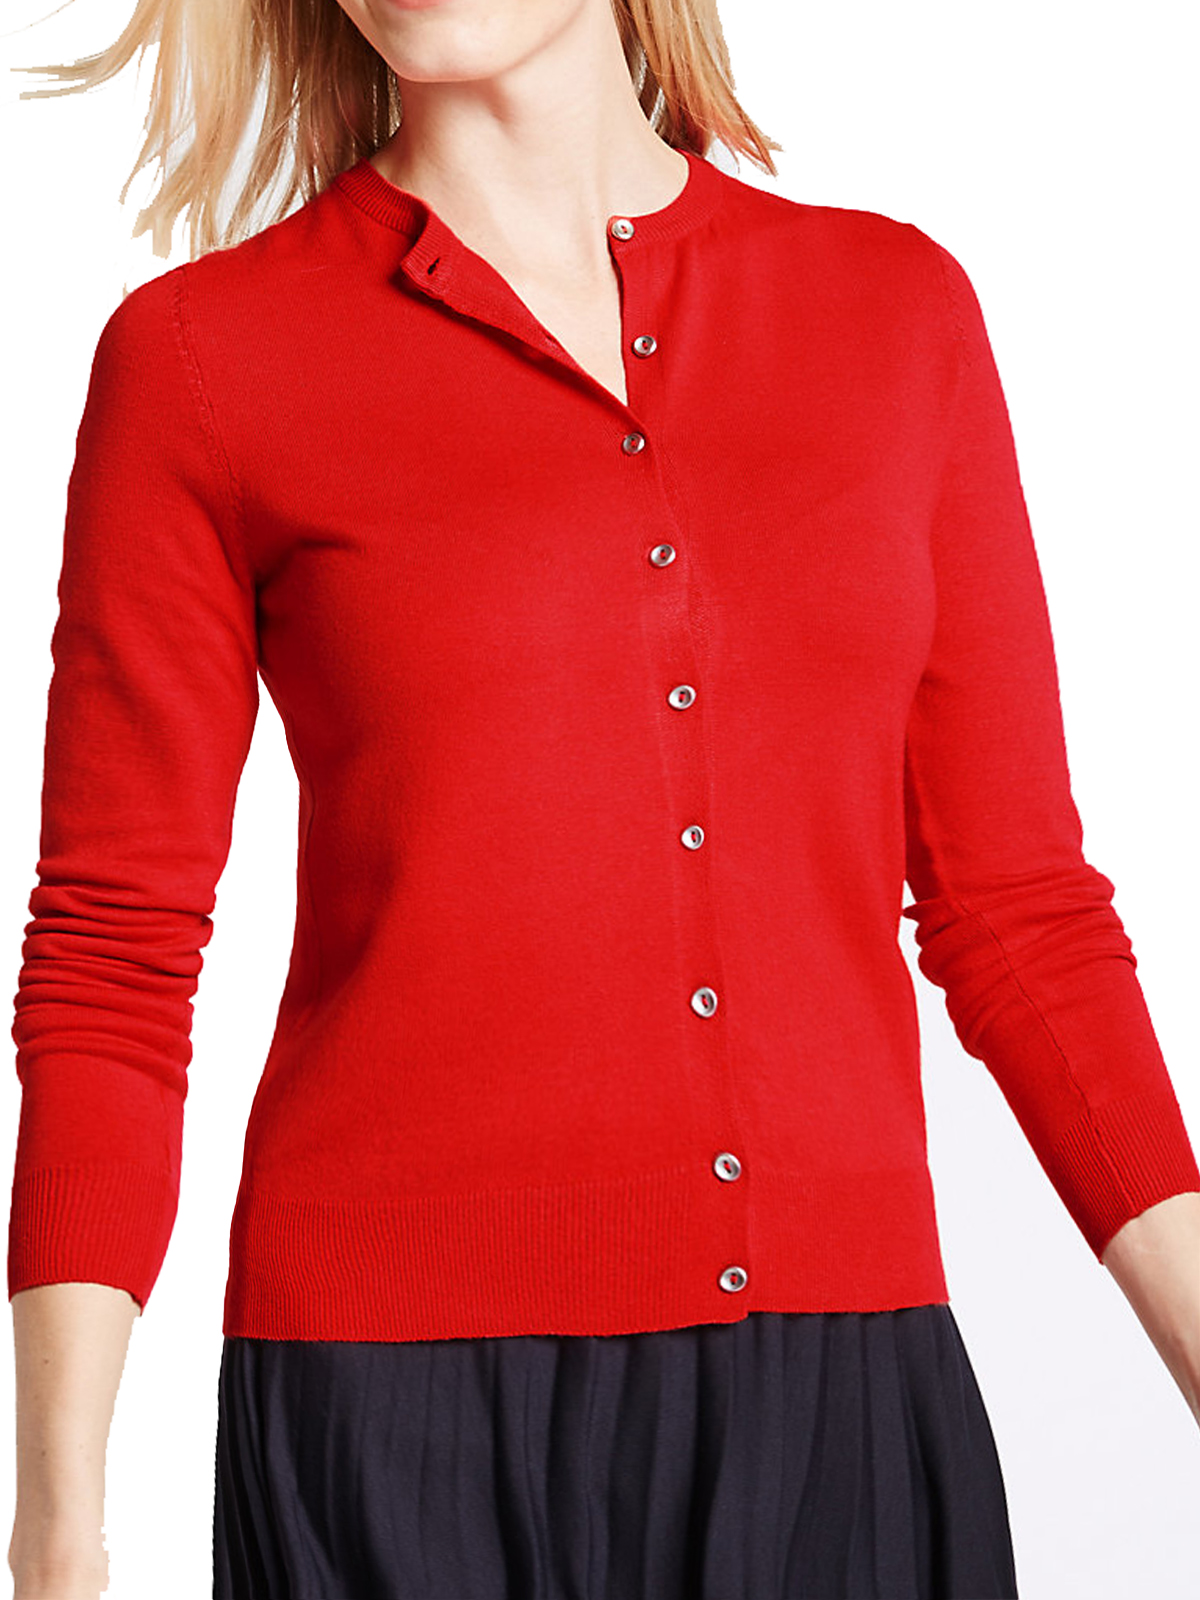 Marks and Spencer - - M&5 LACQUER-RED Ribbed Round Neck Button Through